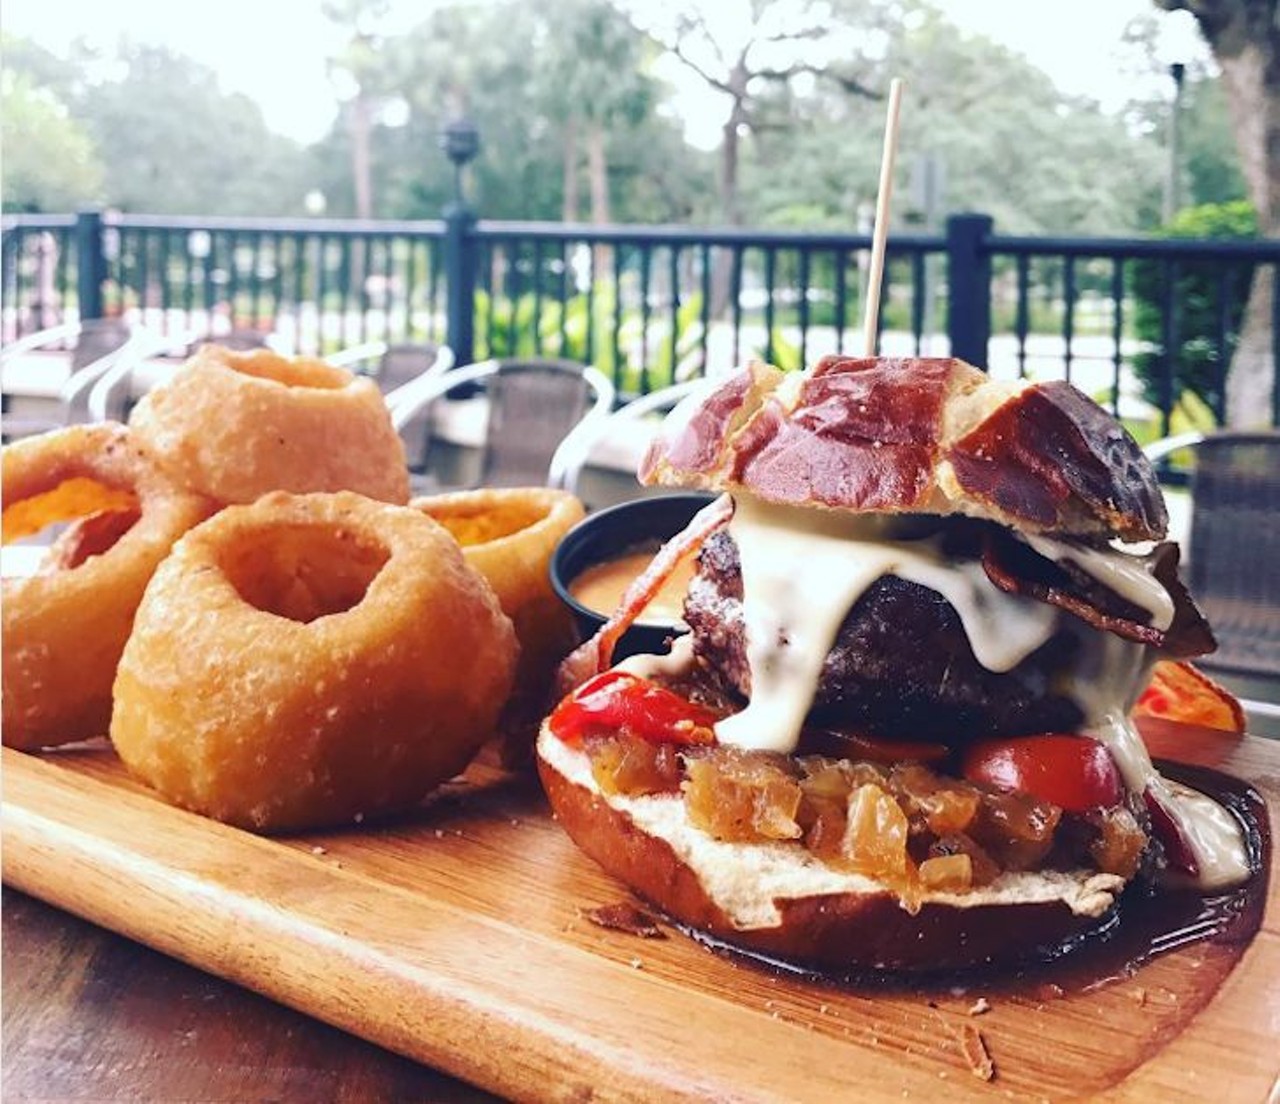 Must  try: While the OMG burger is a Teak classic, The Drunken Monk burger-served with smoked bacon, herb mayo, and provolone cheese, and Angry Orchard onion jam-is just as outrageously delicious.
Photo via orlandoeats/Instagram